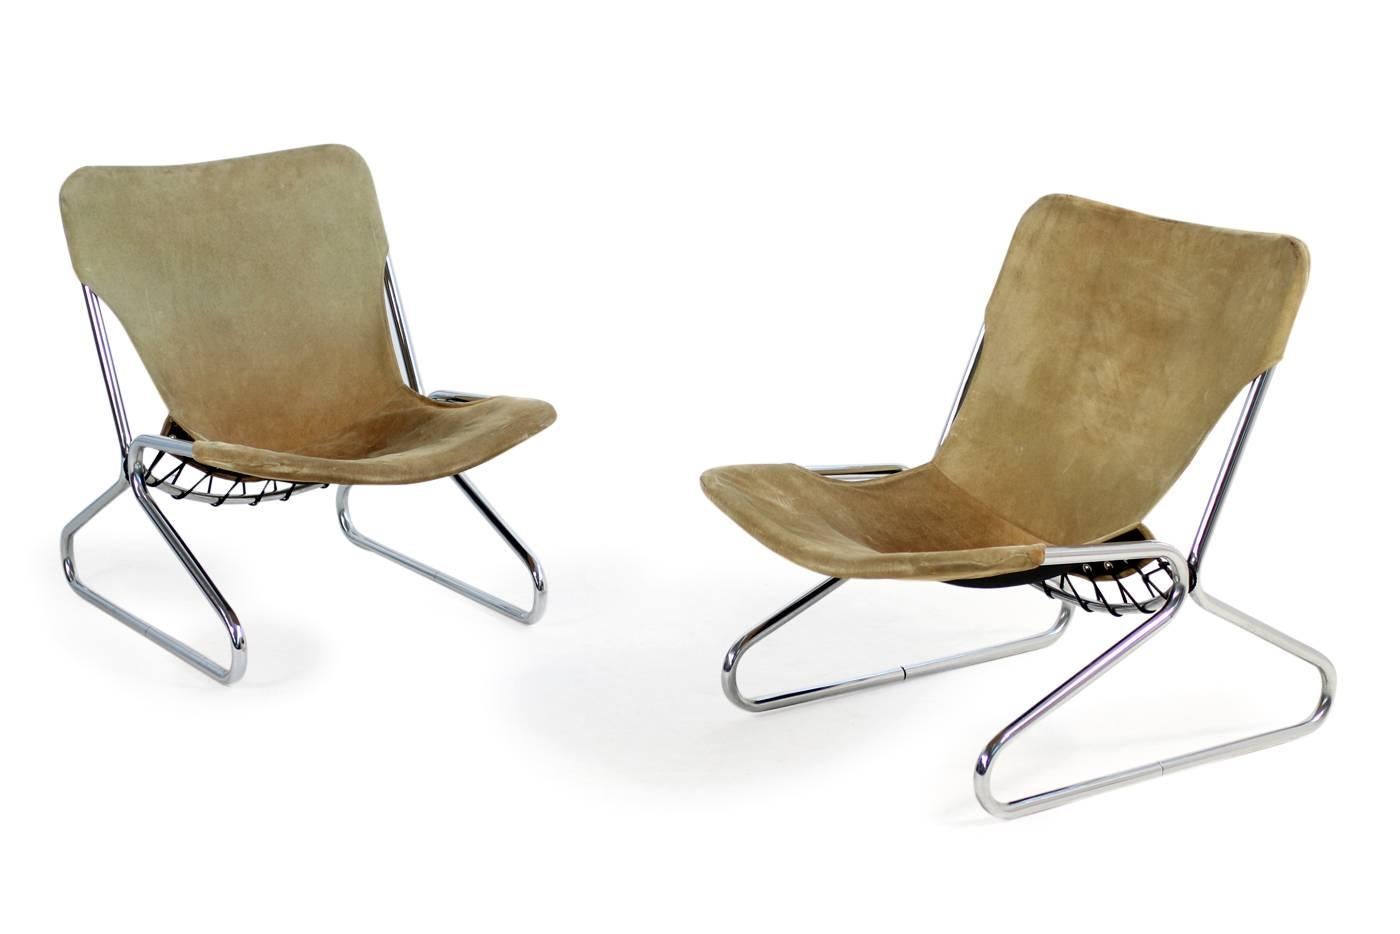 Pair of 1960s Suede Leather and Chrome Easy Lounge Chairs Danish Modern 1